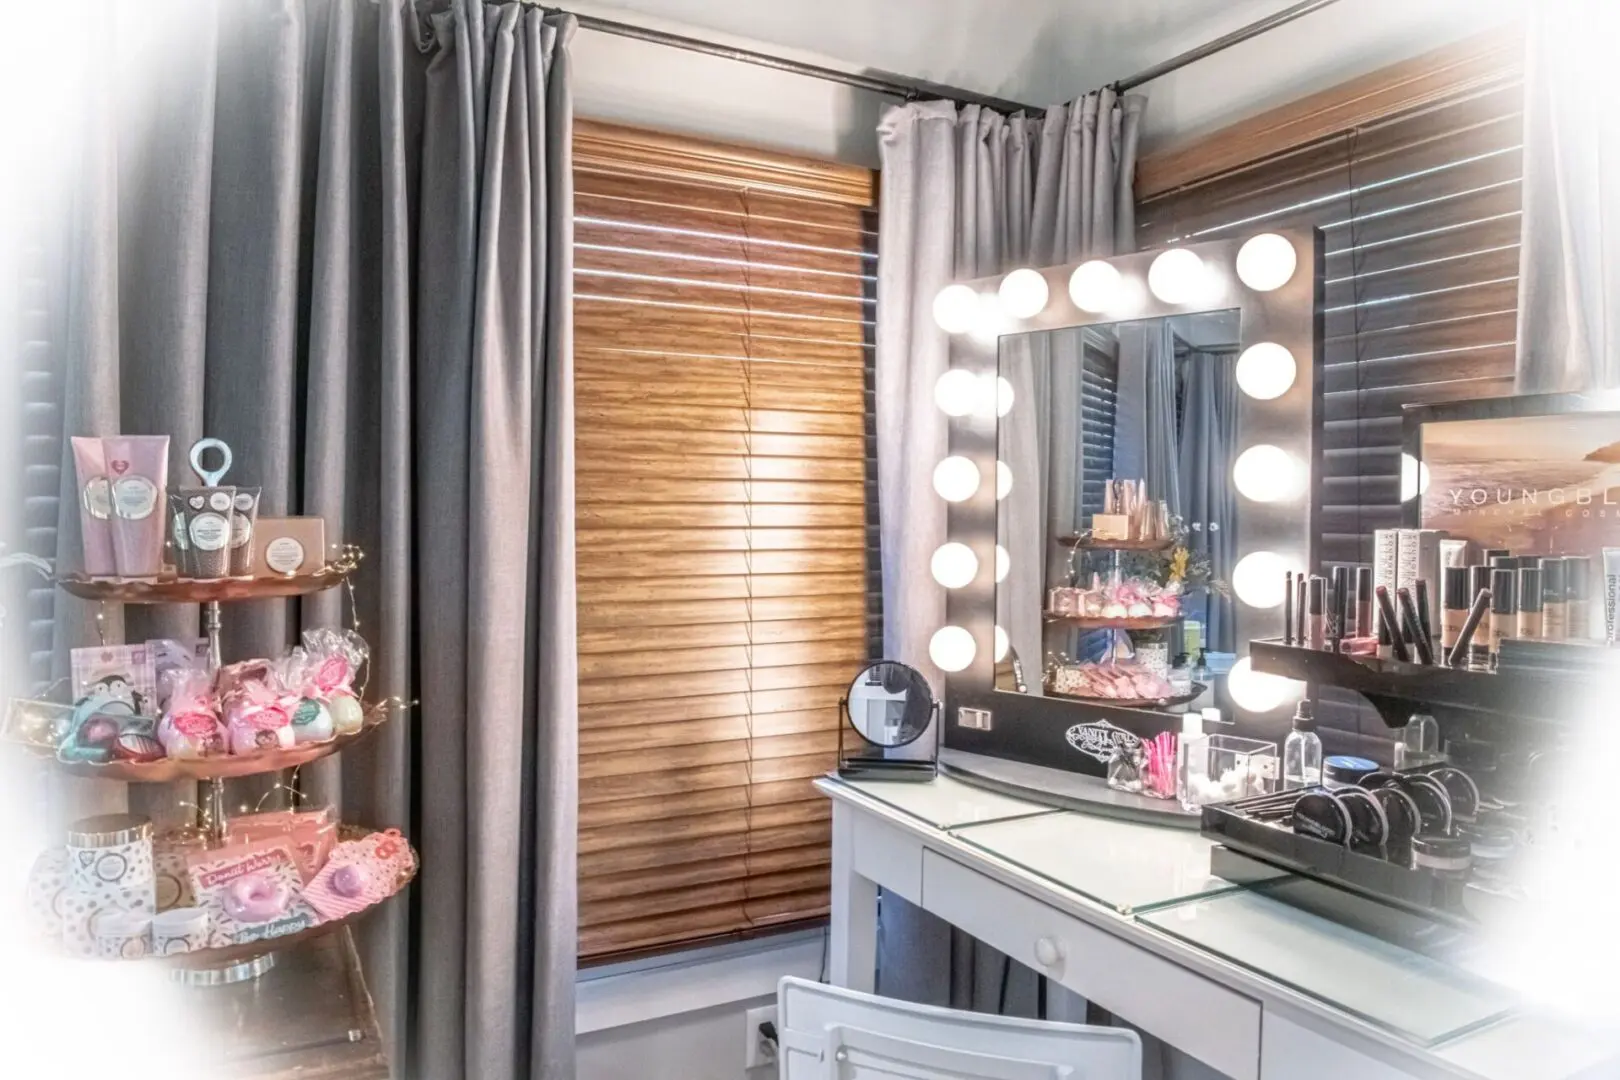 A vanity with lights and a mirror in it